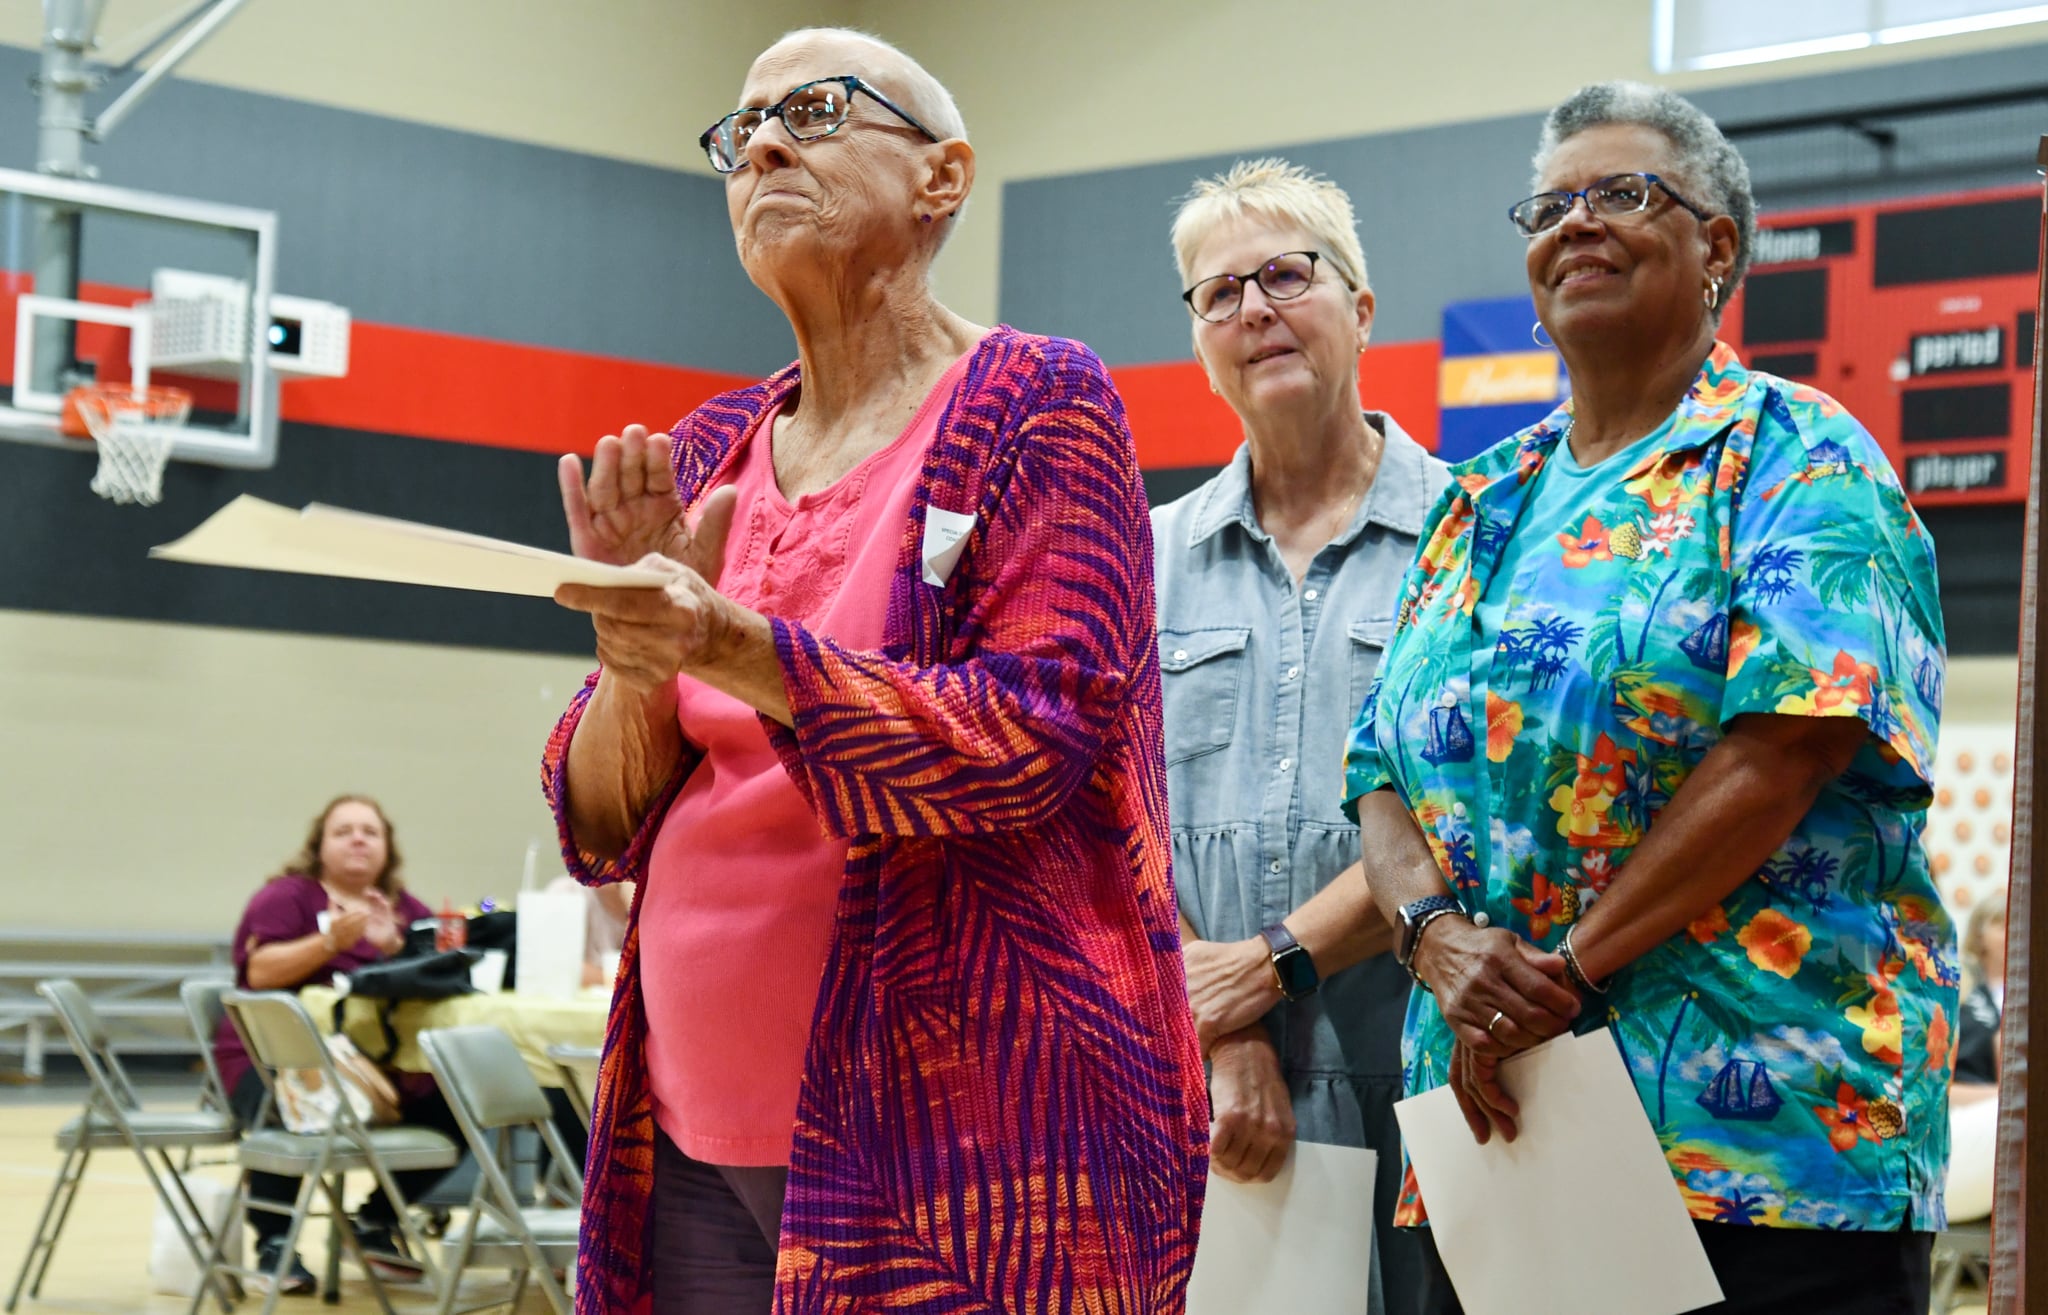 Bea Webb, Genice Fisher and Linda May watch a video together at the first-ever Coaches Celebration Event on Saturday, July 16, 2022 at the Training for Life Campus in Jefferson City, Mo.